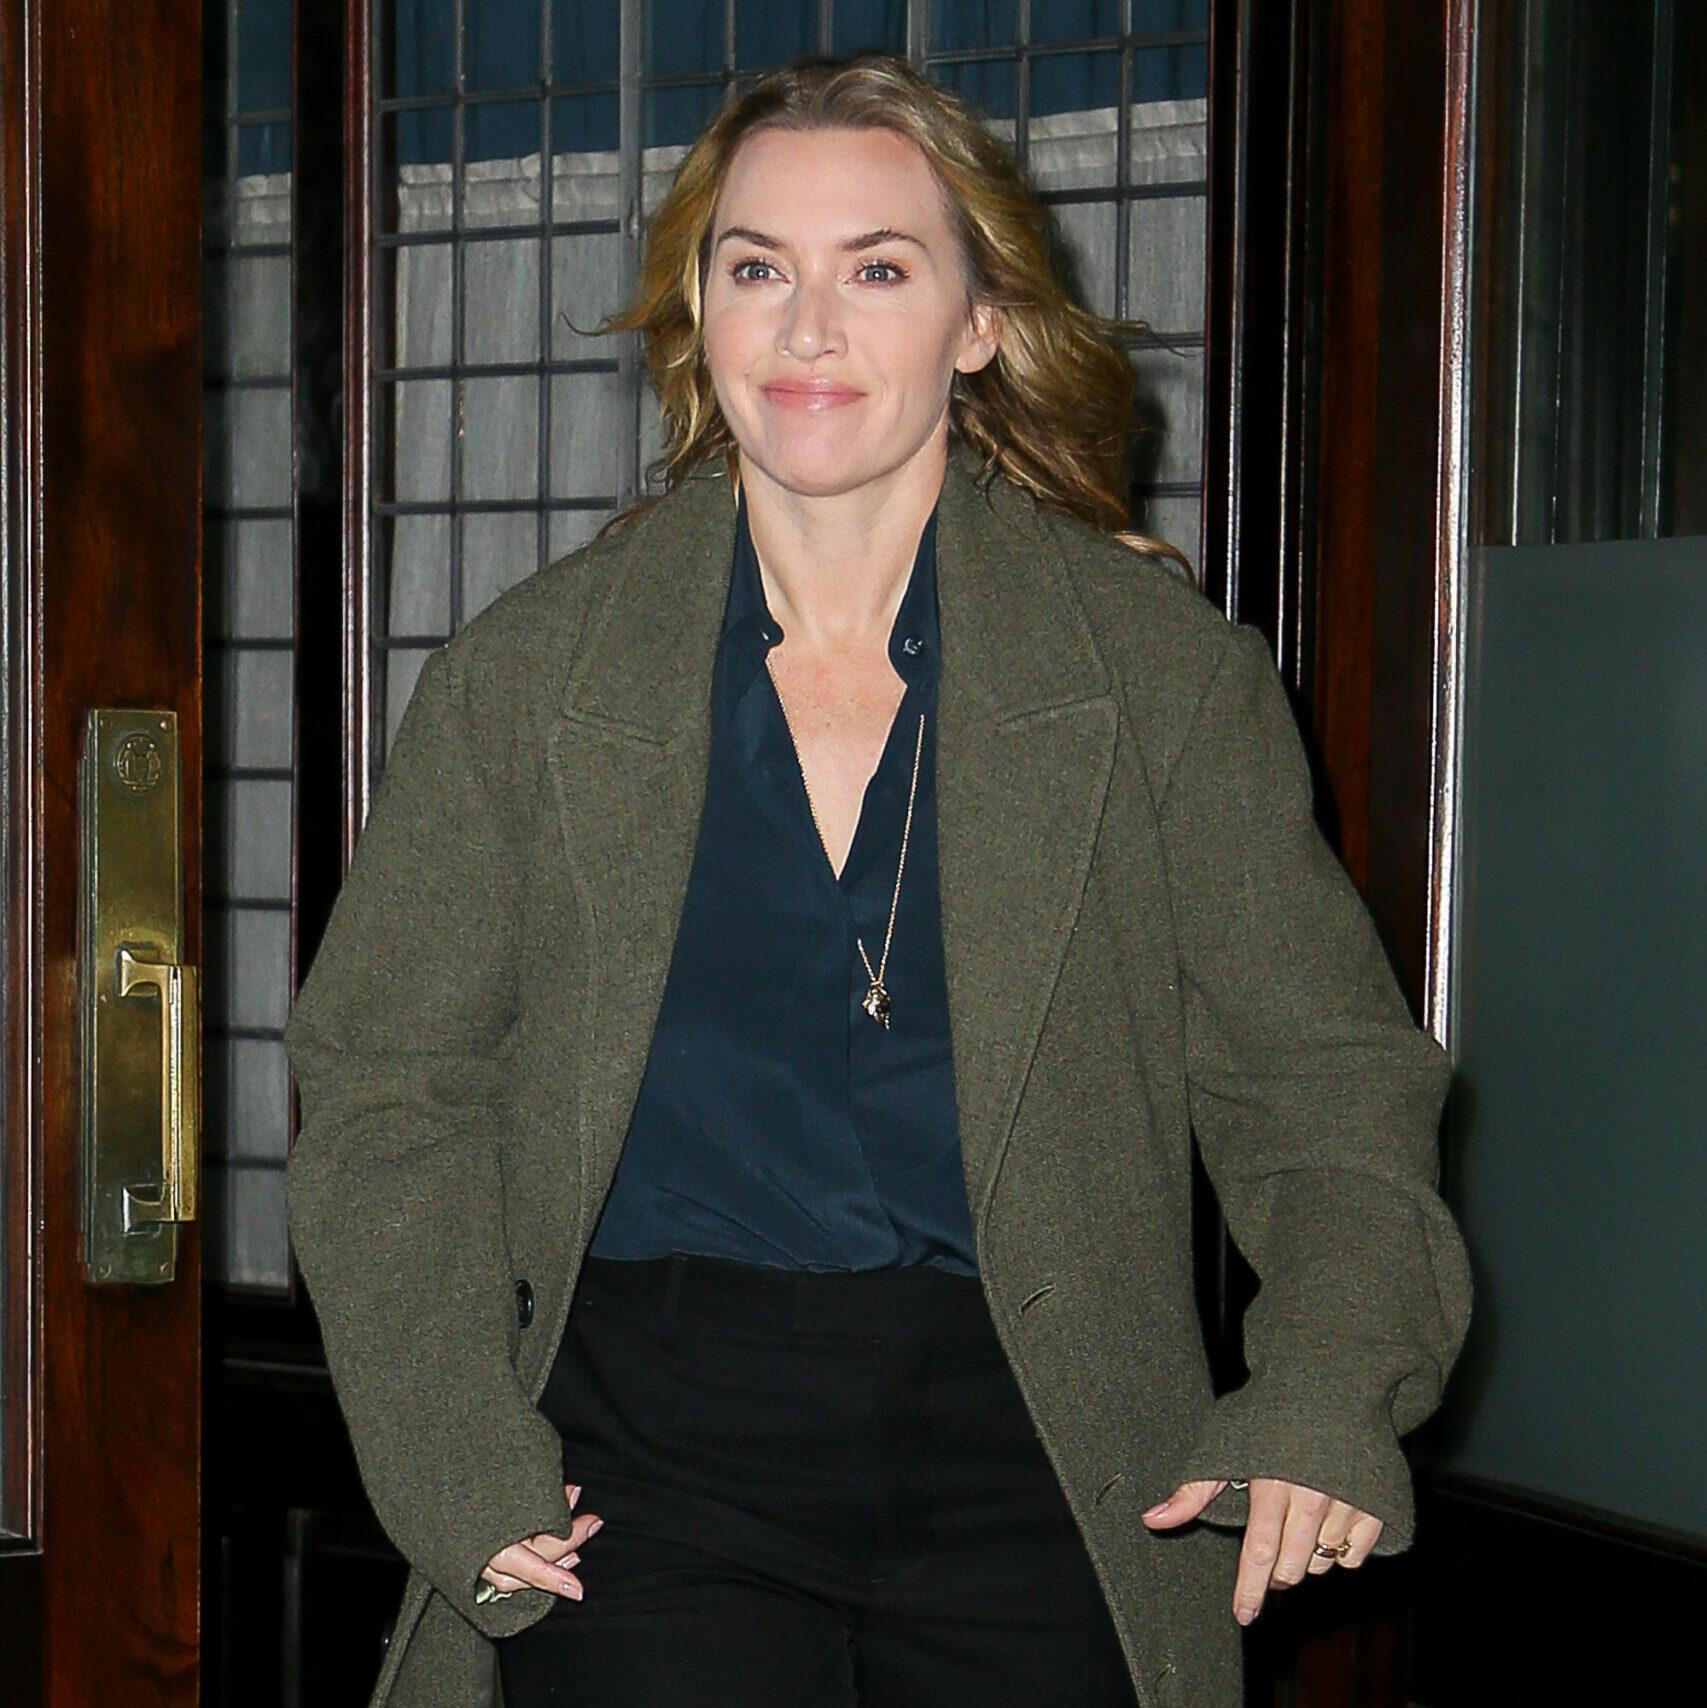 Kate Winslet was seen leaving the Greenwich Hotel in New York City